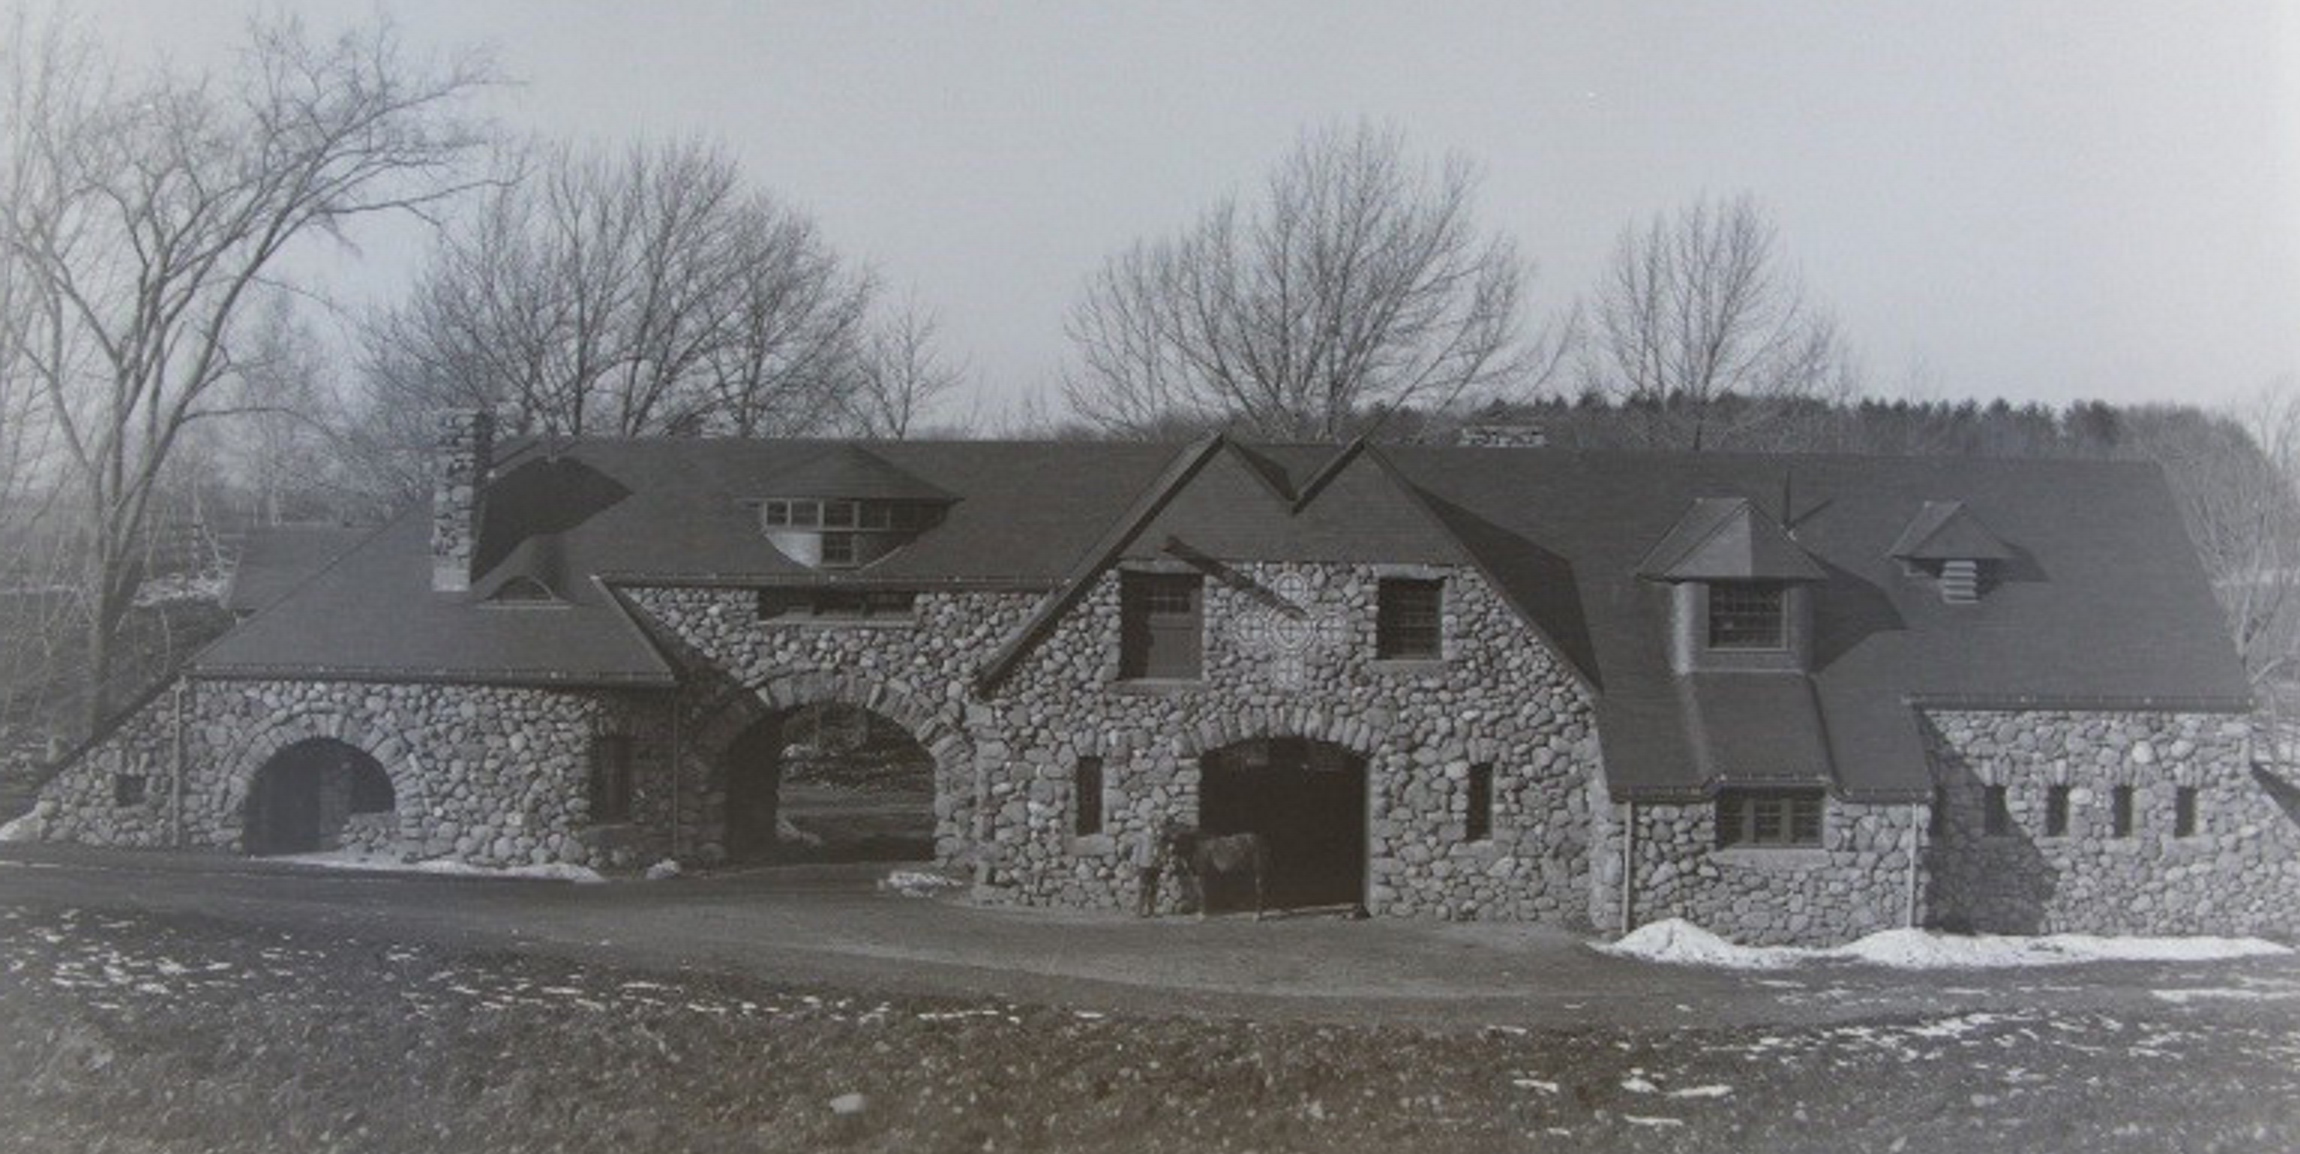 Black and white photograph of stone gatehouse building with arched entrances. Some snow on the ground.